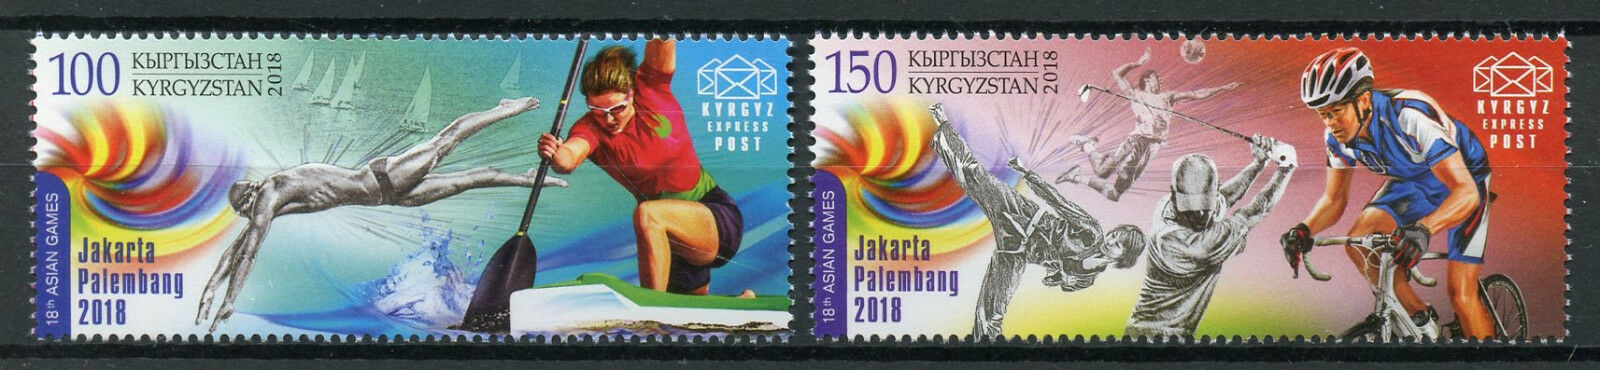 Kyrgyzstan KEP 2018 MNH Asian Games Indonesia 2v Set Cycling Golf Sports Stamps